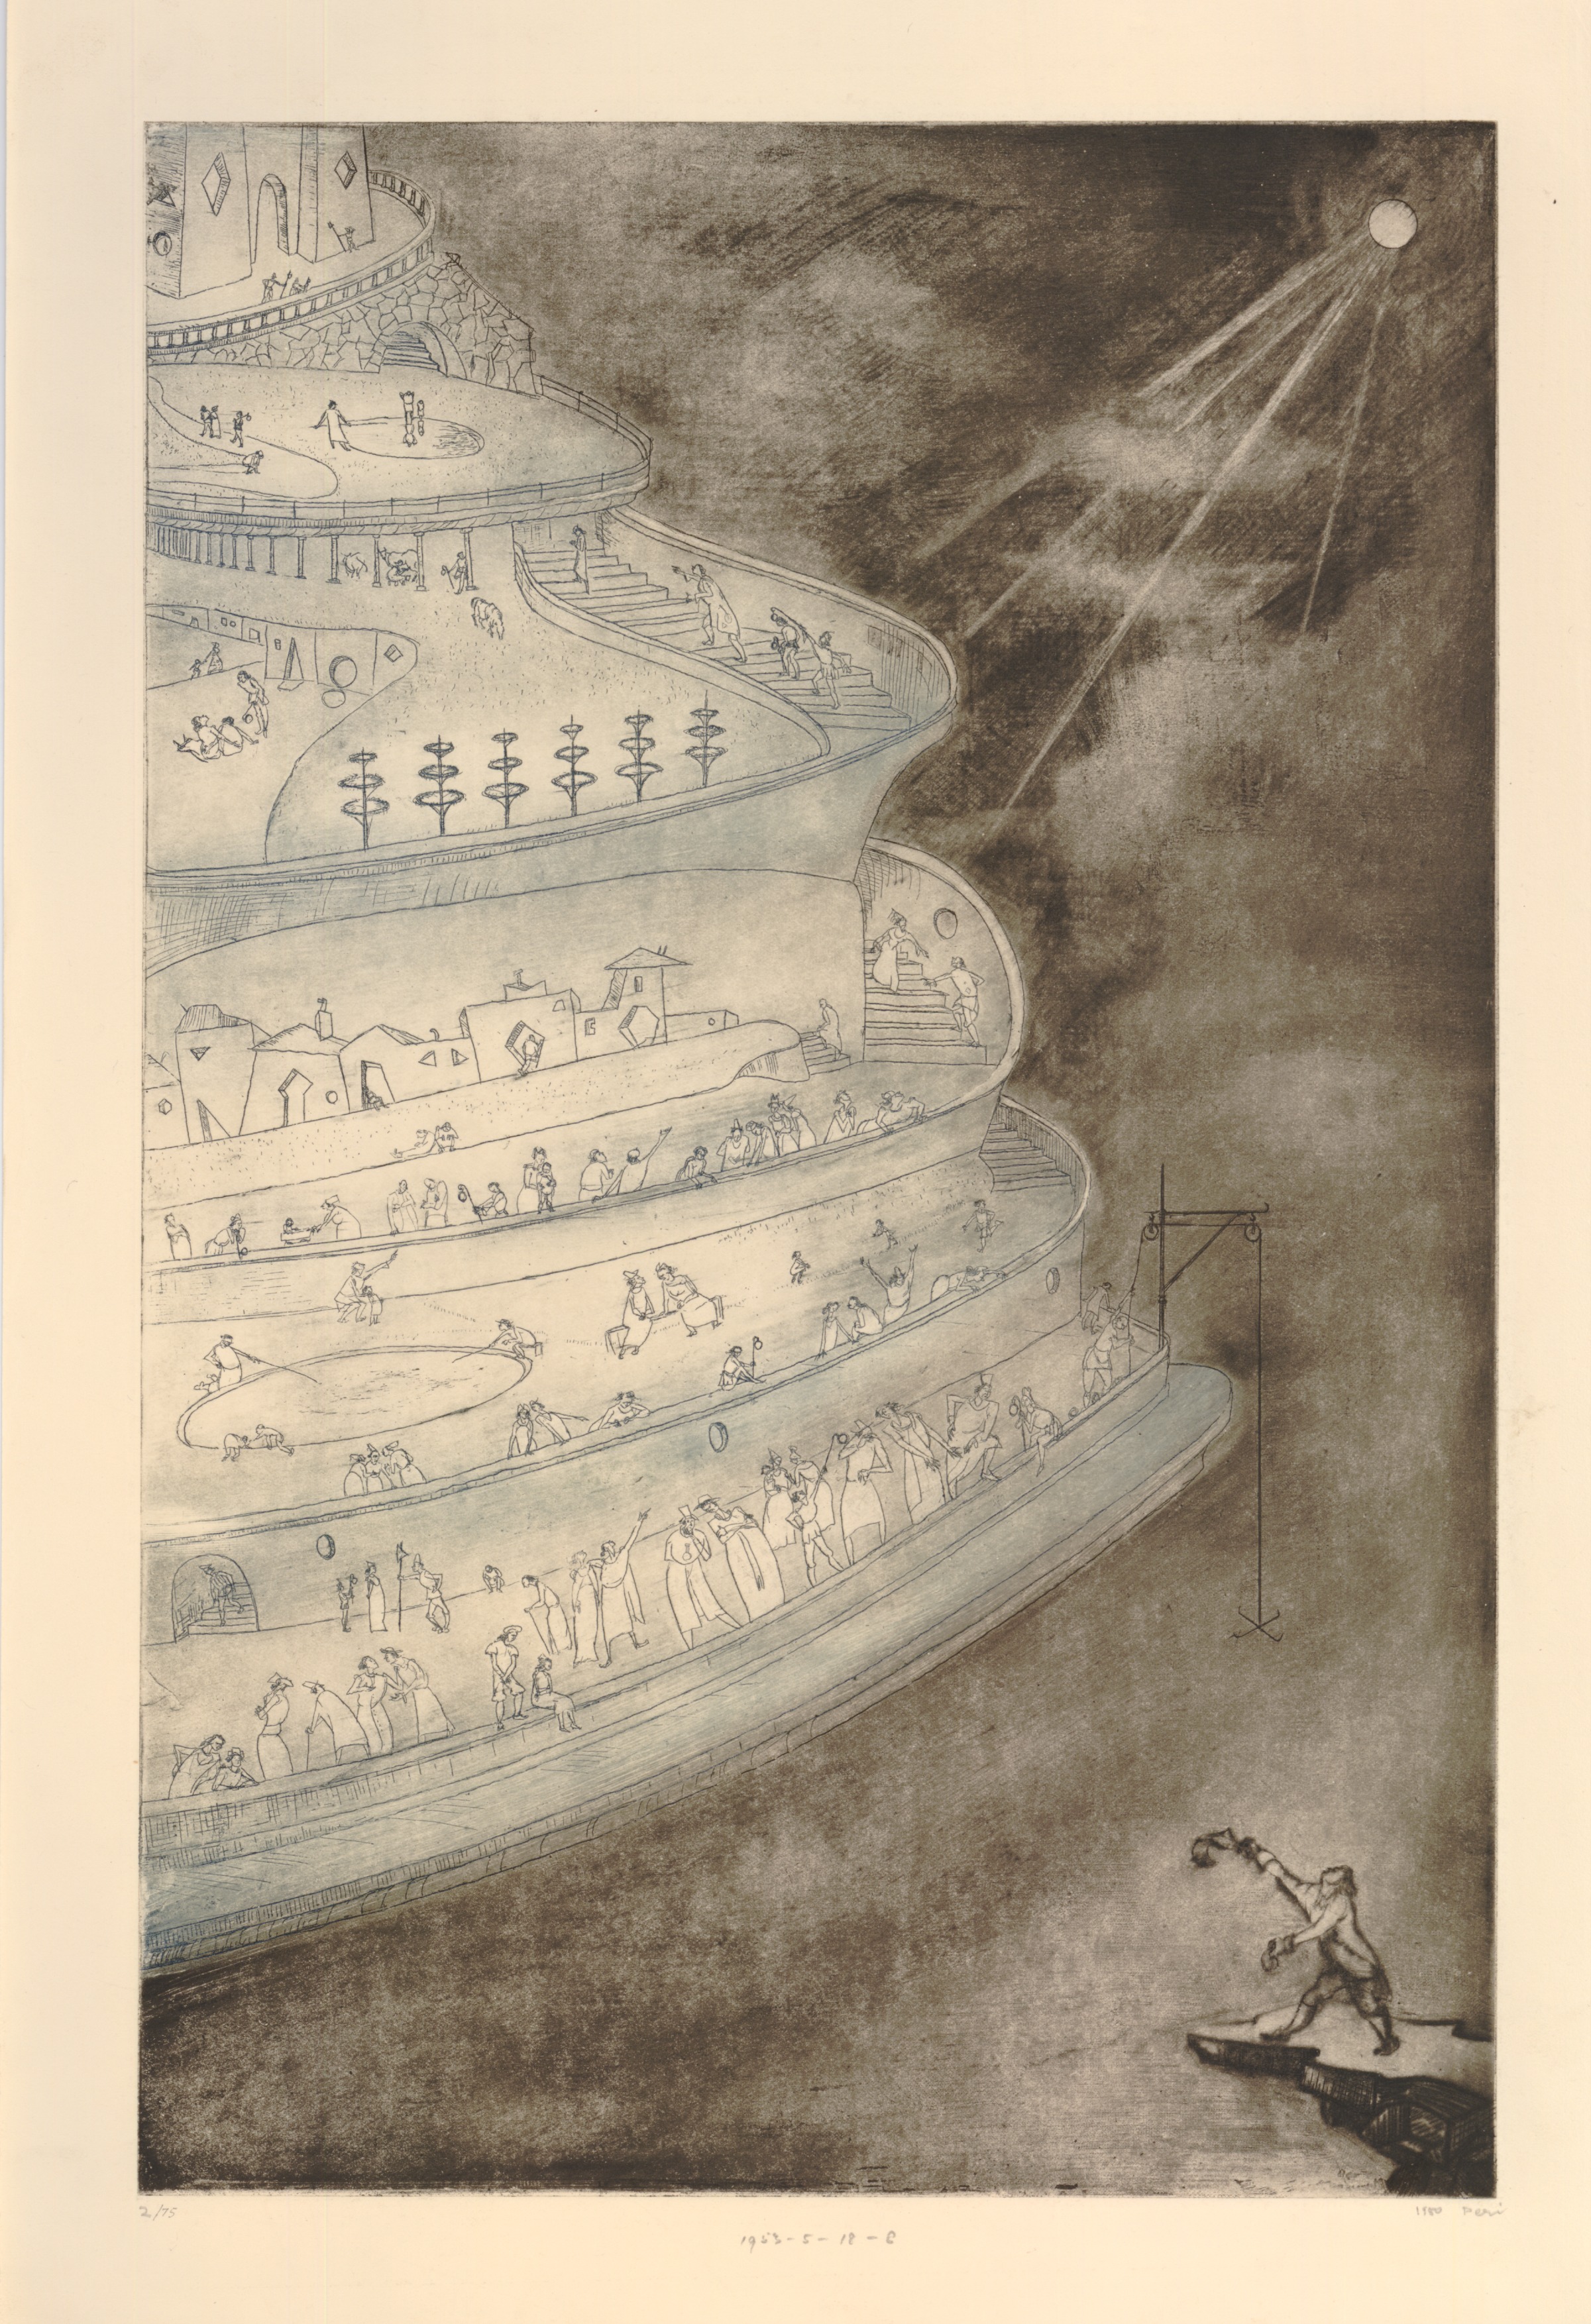 Voyage to Laputa: The flying island (from a series of eight etchings of Jonathan Swift's 'Gulliver's Travels') (1950)